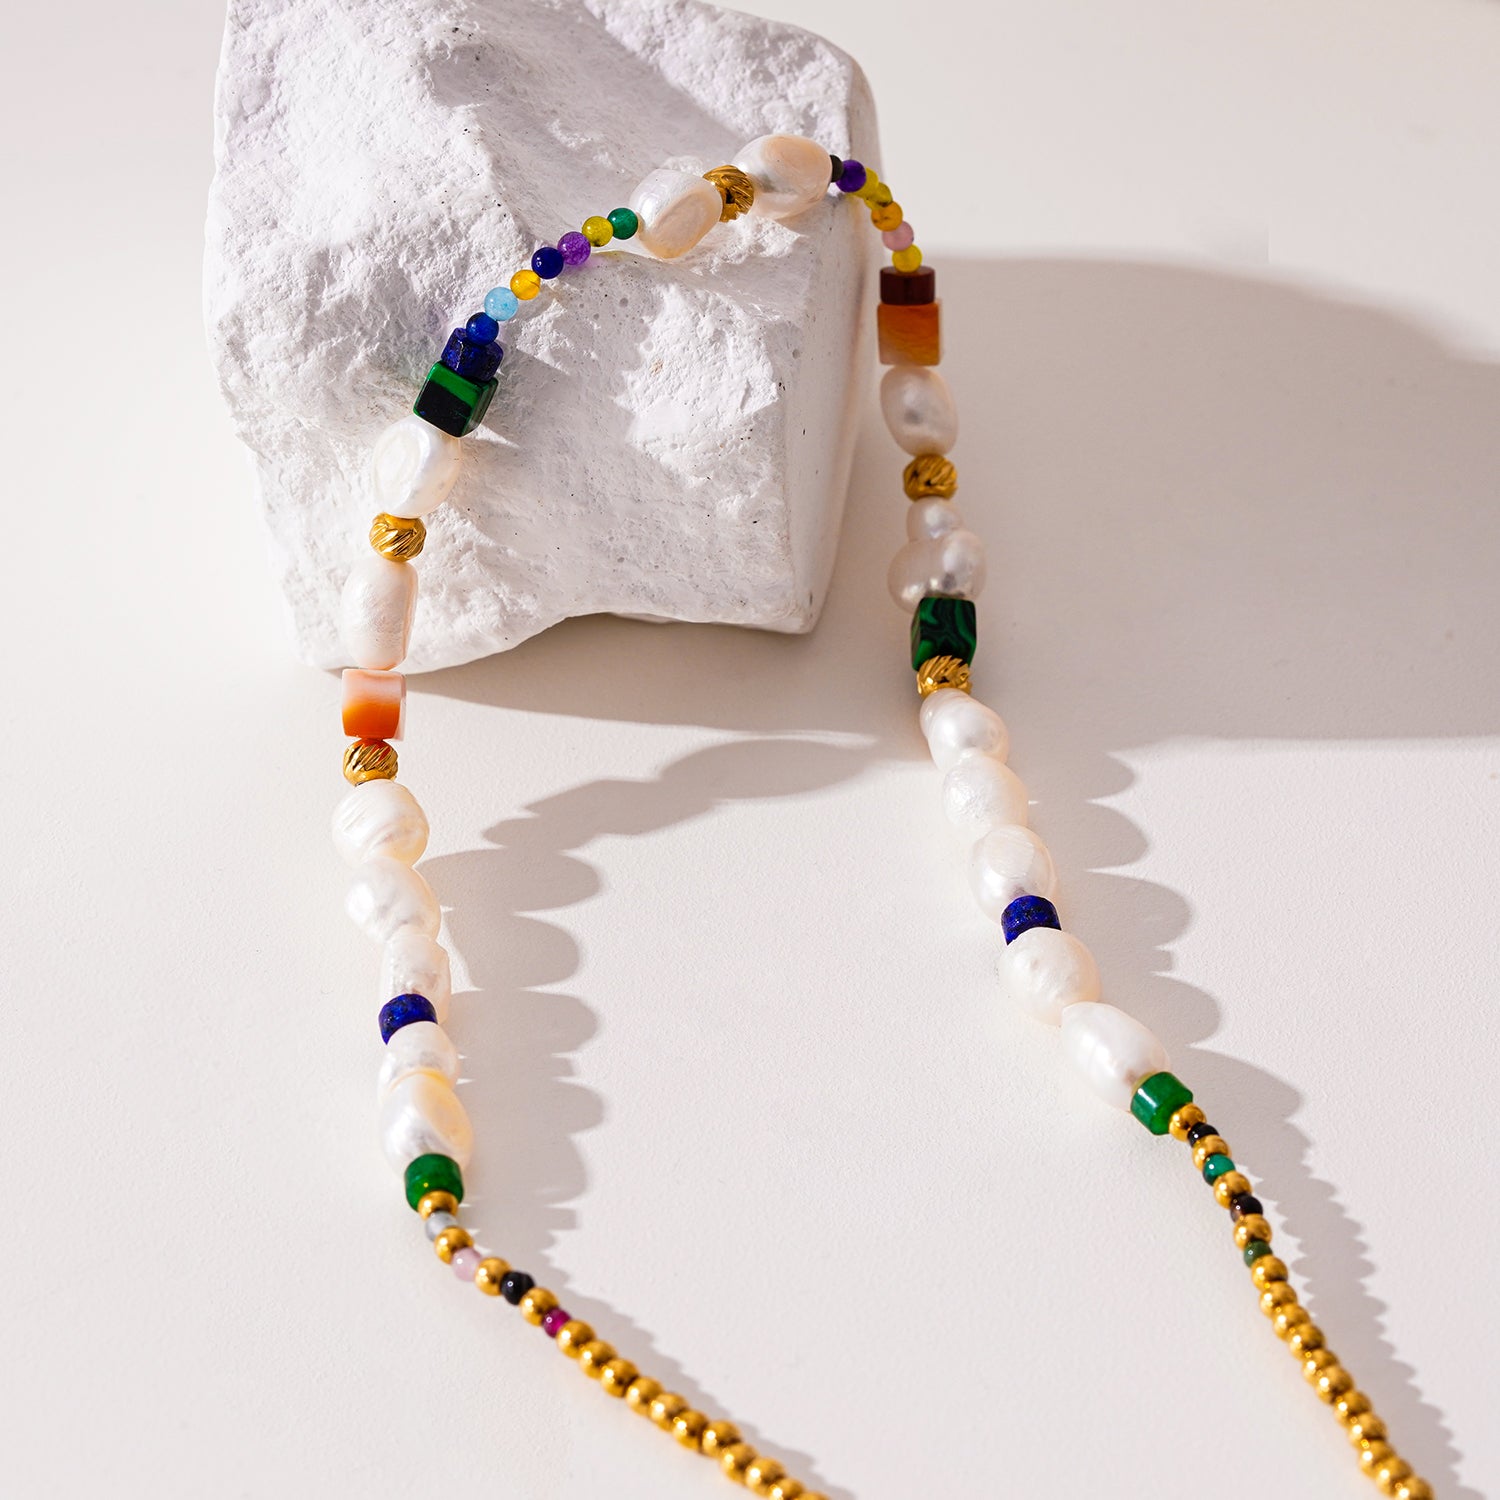 Style AMADIA 4663: Paradise Found - Colourful Necklace with Gold Beads, Natural Stones, and Freshwater Pearls.